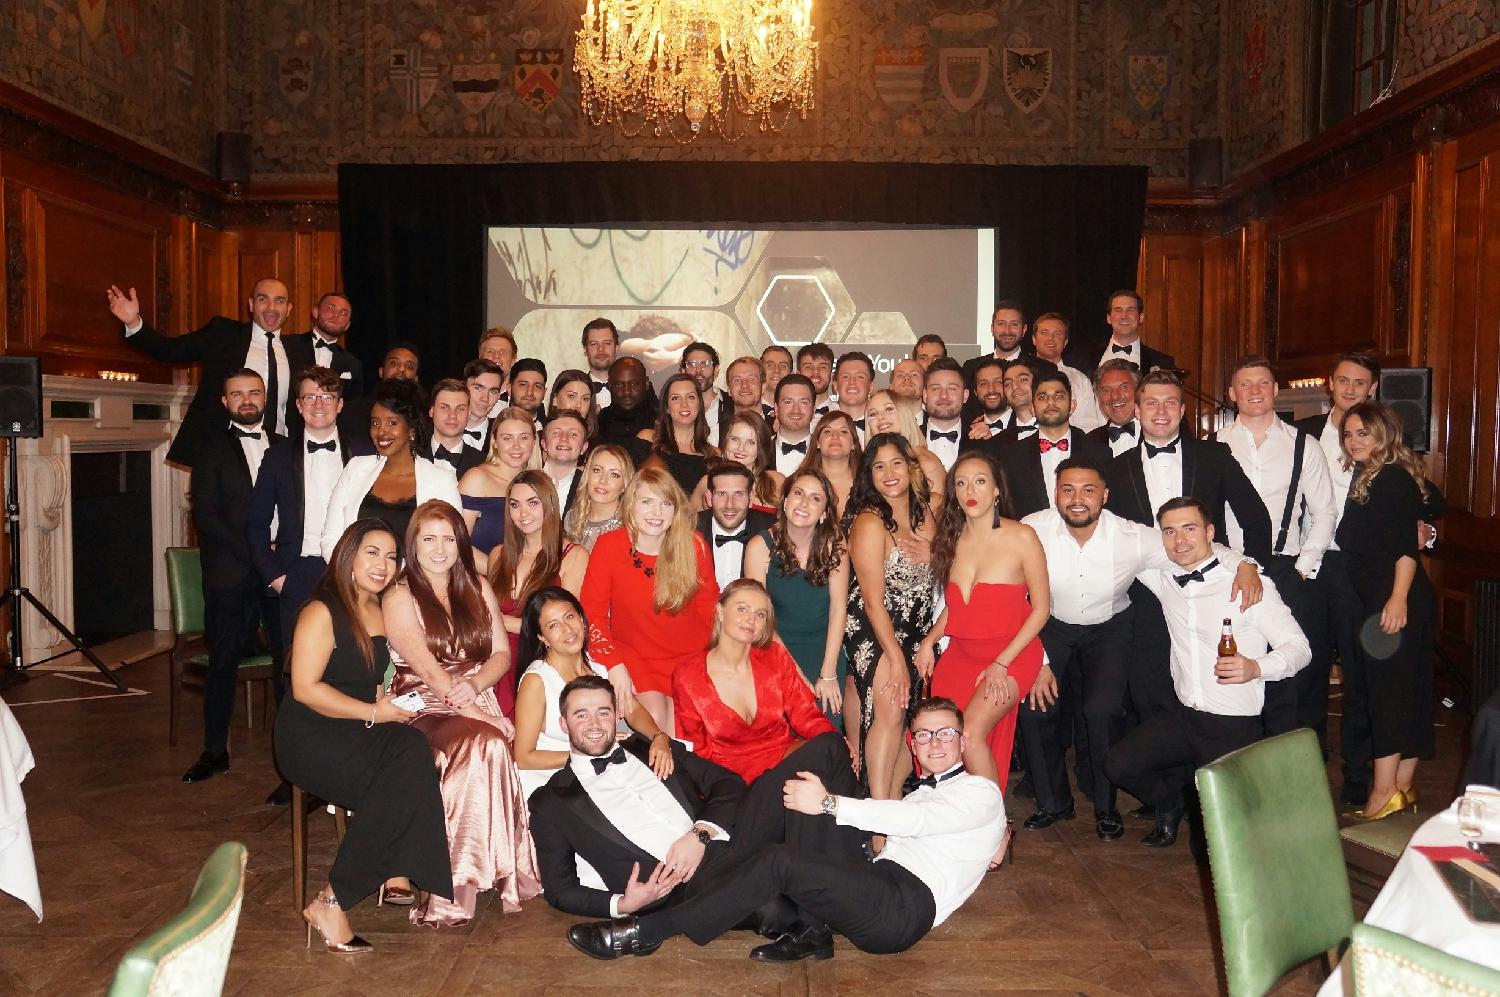 Annual Black-Tie Event where money is raised for charity.